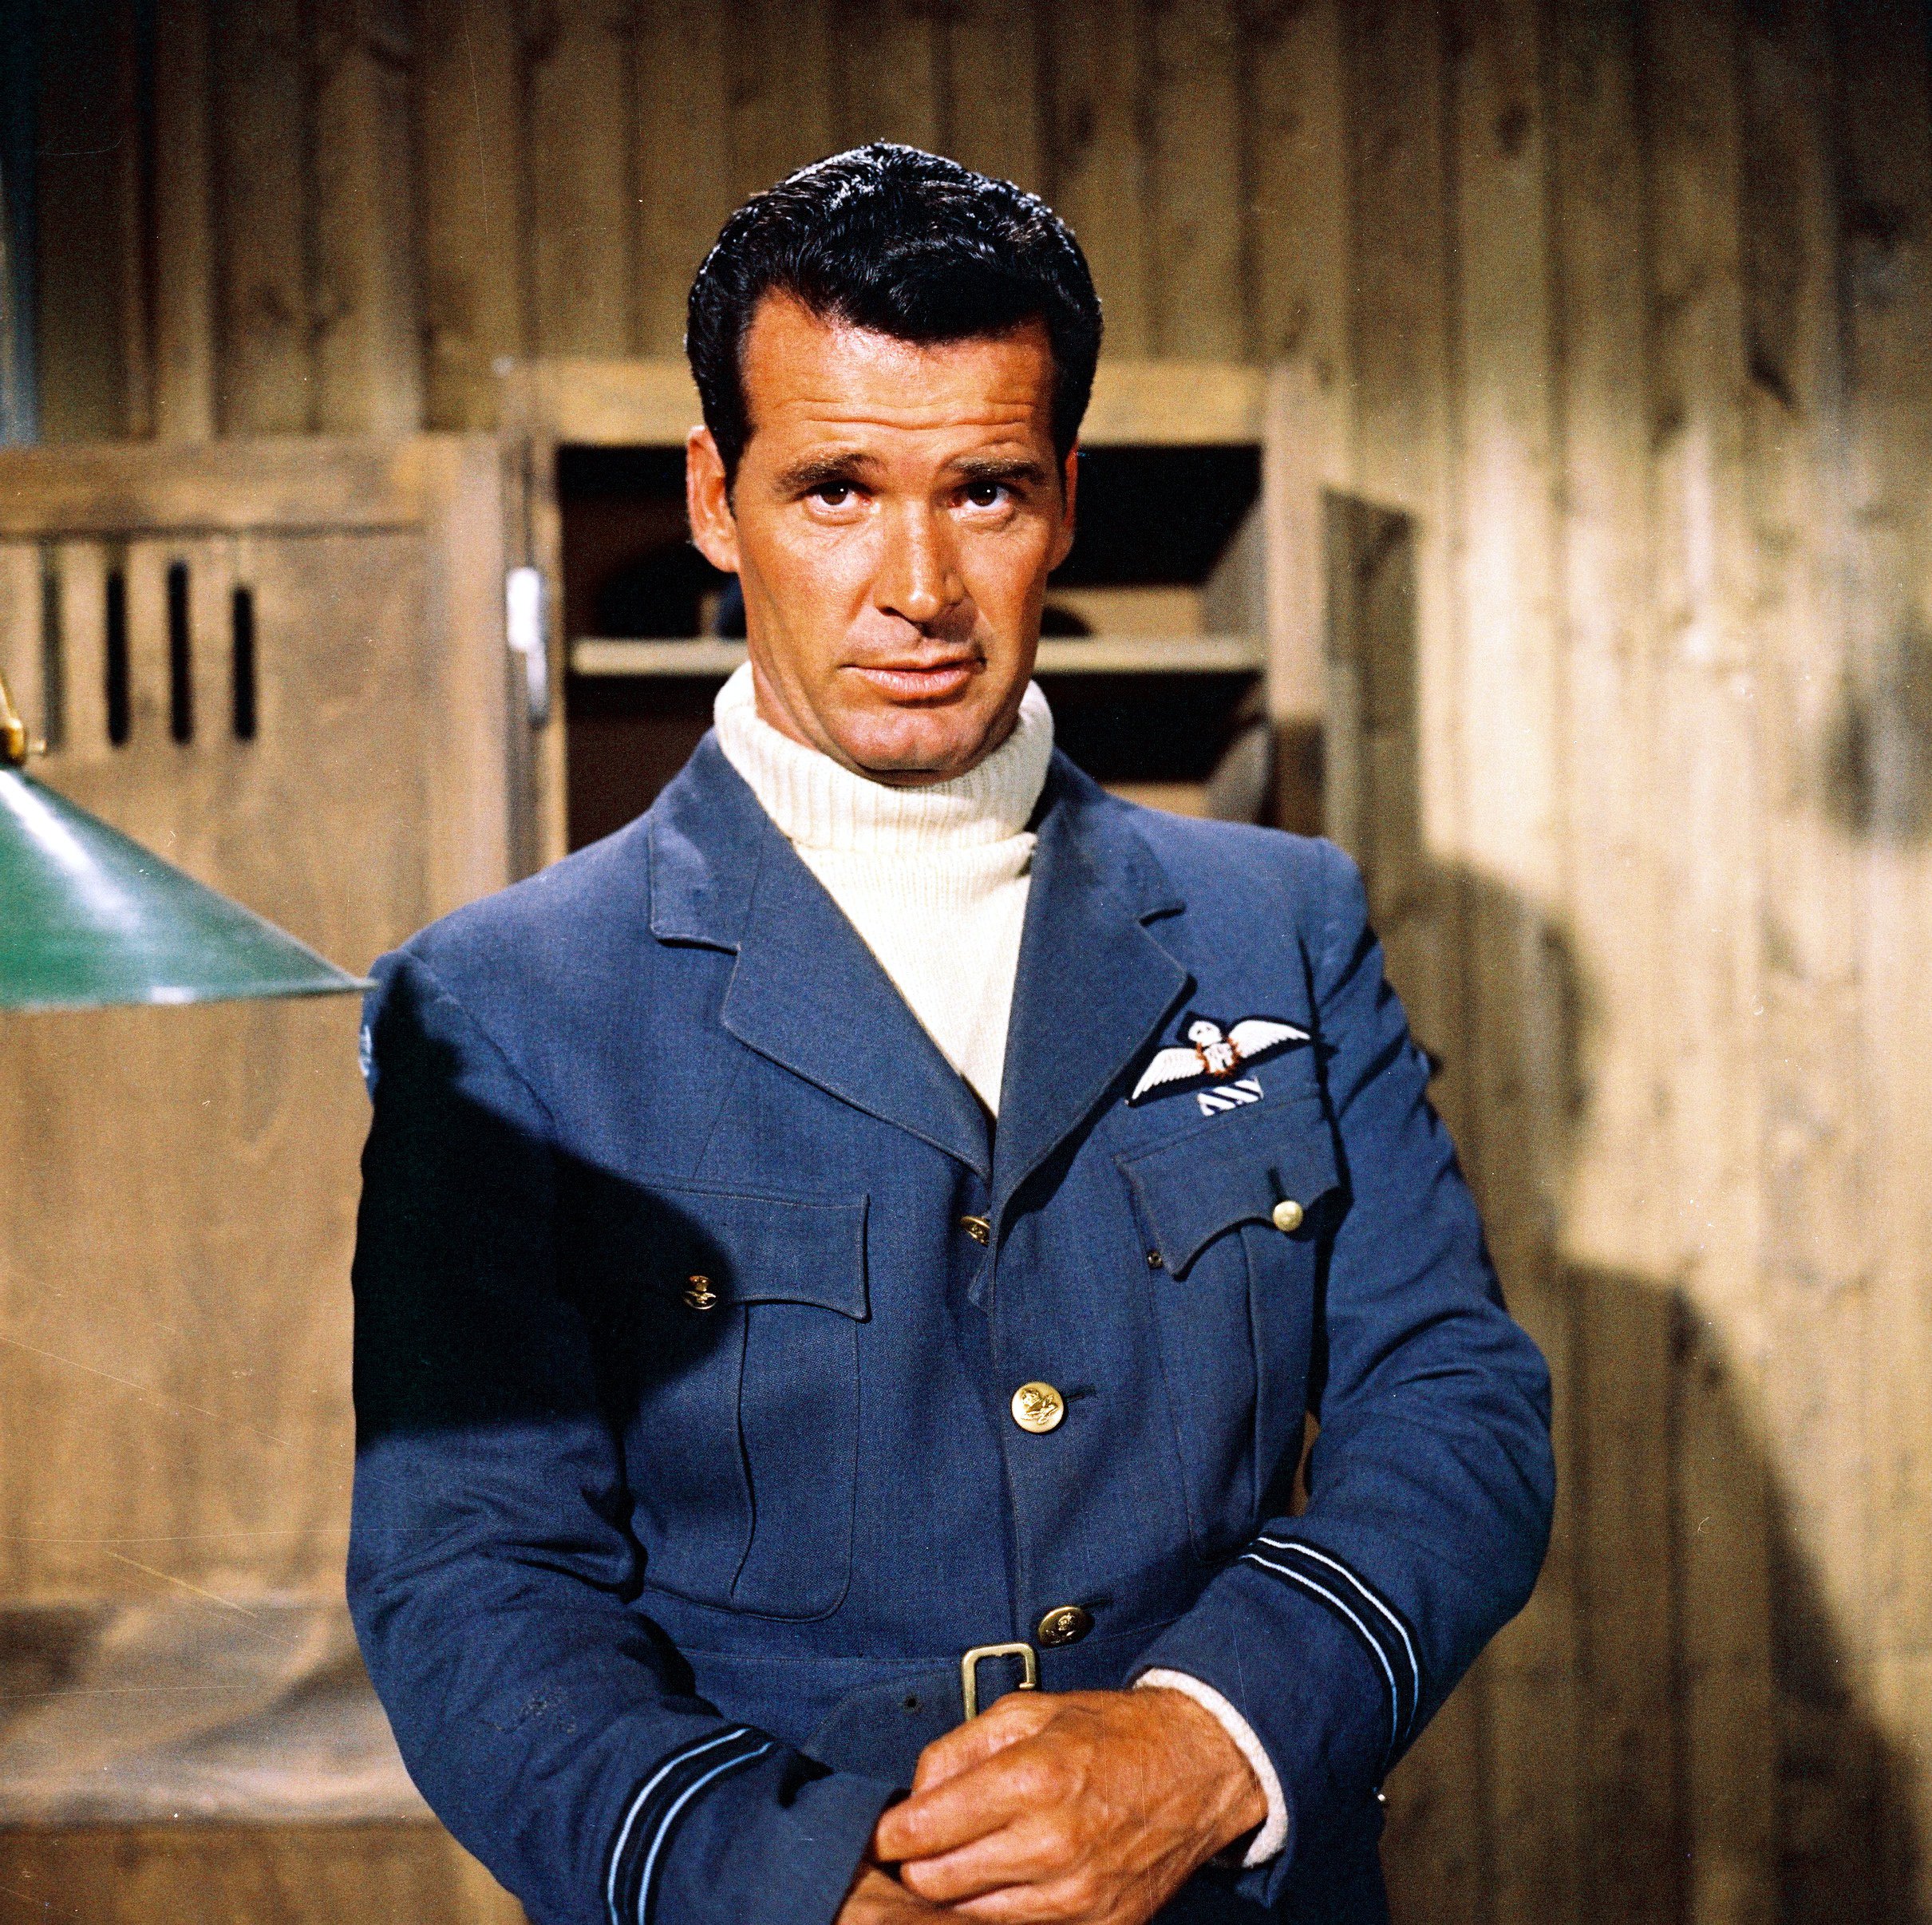 James Garner wearing a blue Royal Air Force uniform in a publicity portrait issued for the film, "The Great Escape" in 1963. | Source: Getty Images